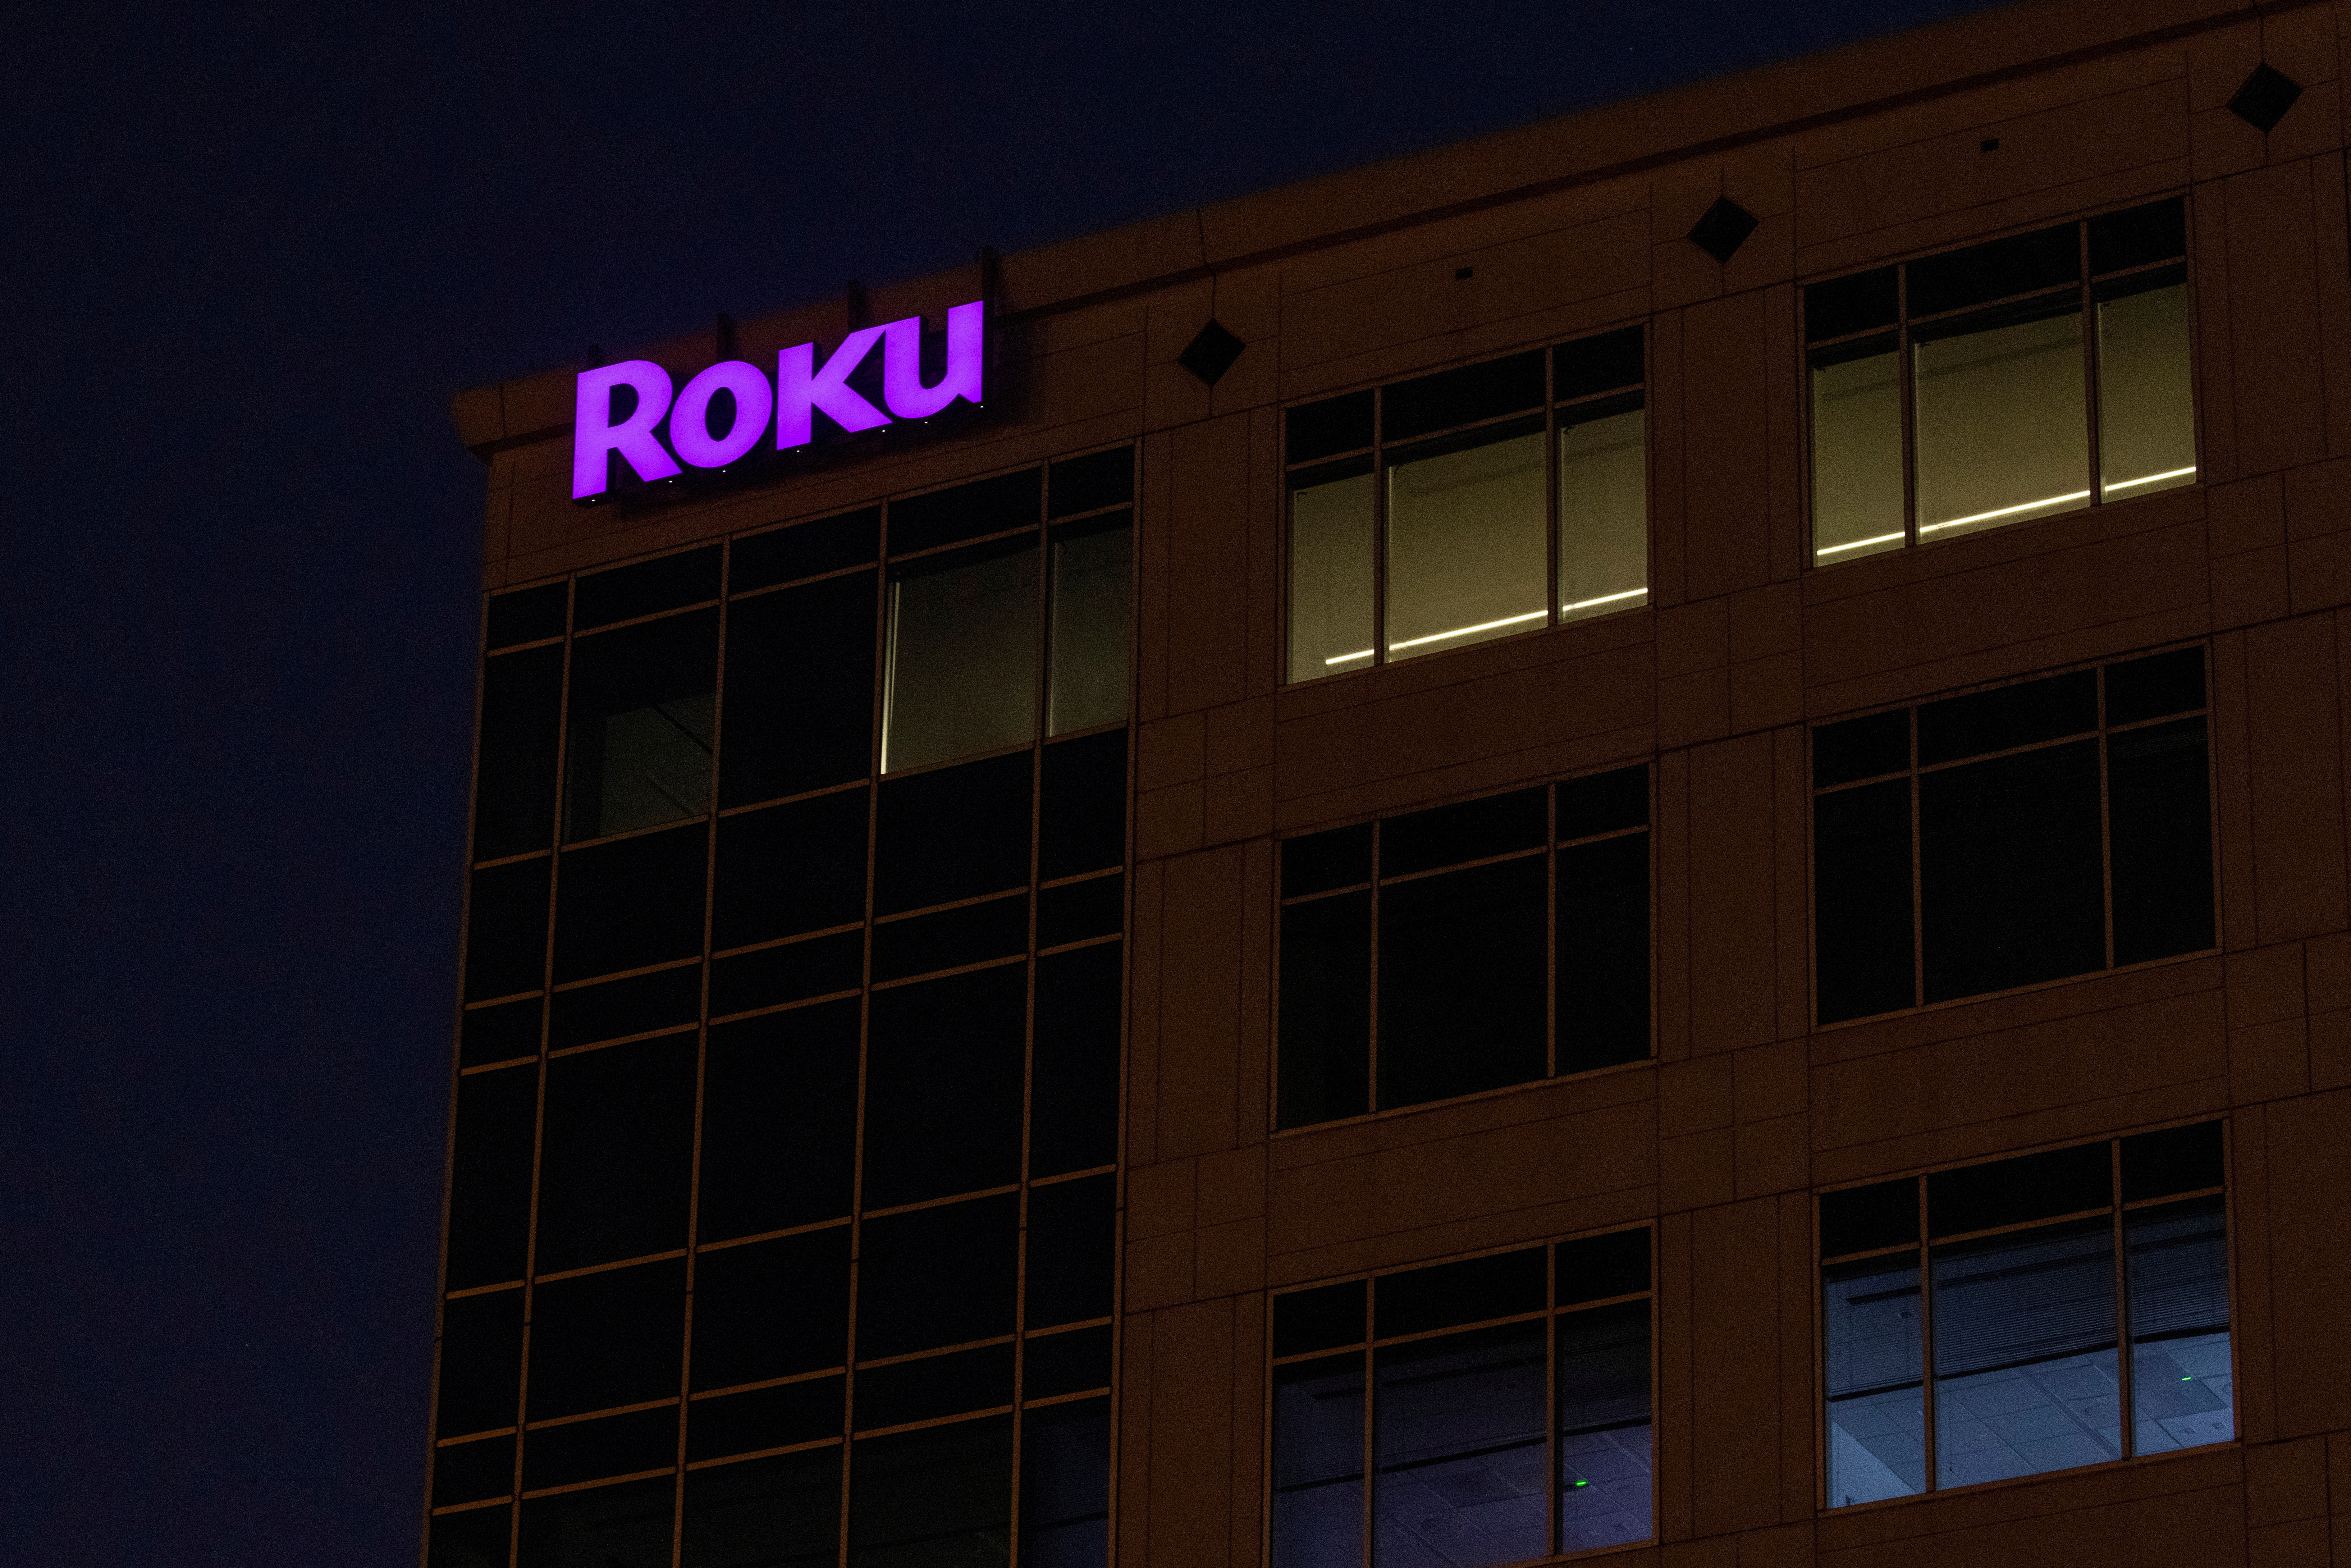 The Roku company logo is displayed on a building in Austin, Texas